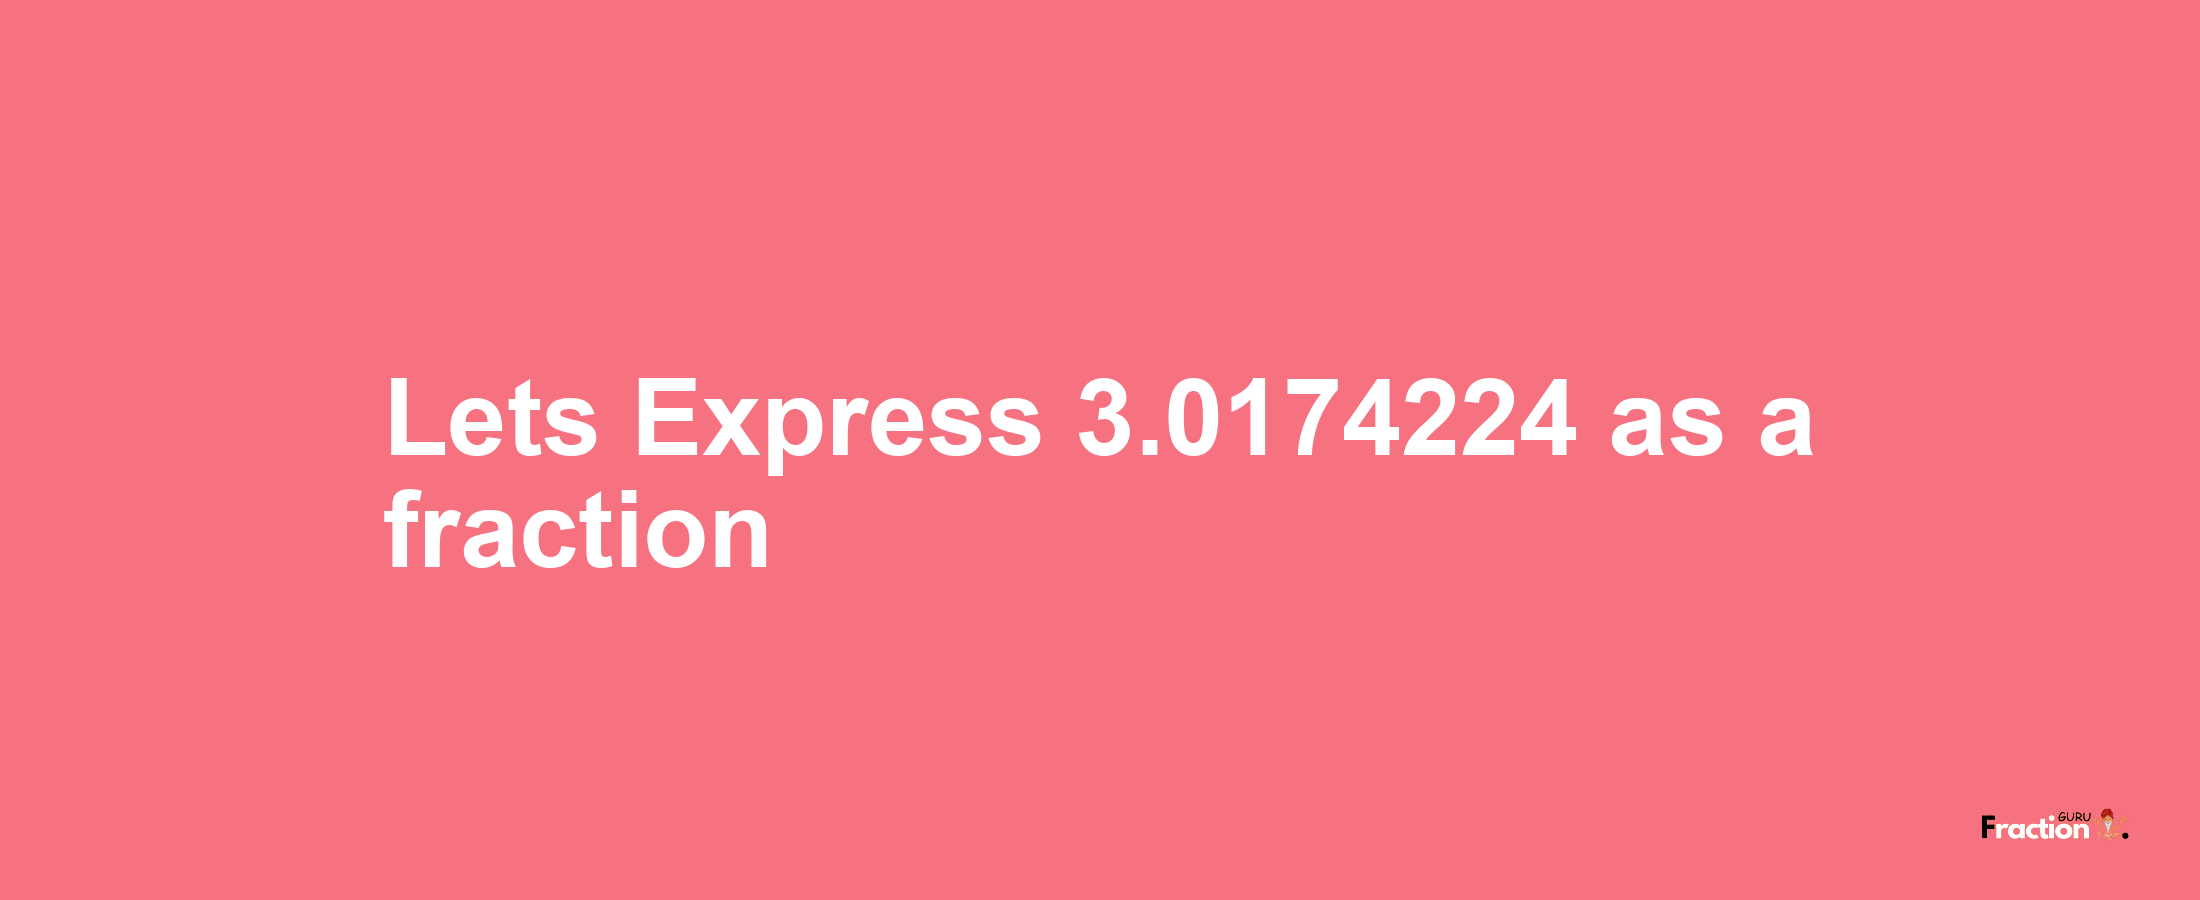 Lets Express 3.0174224 as afraction